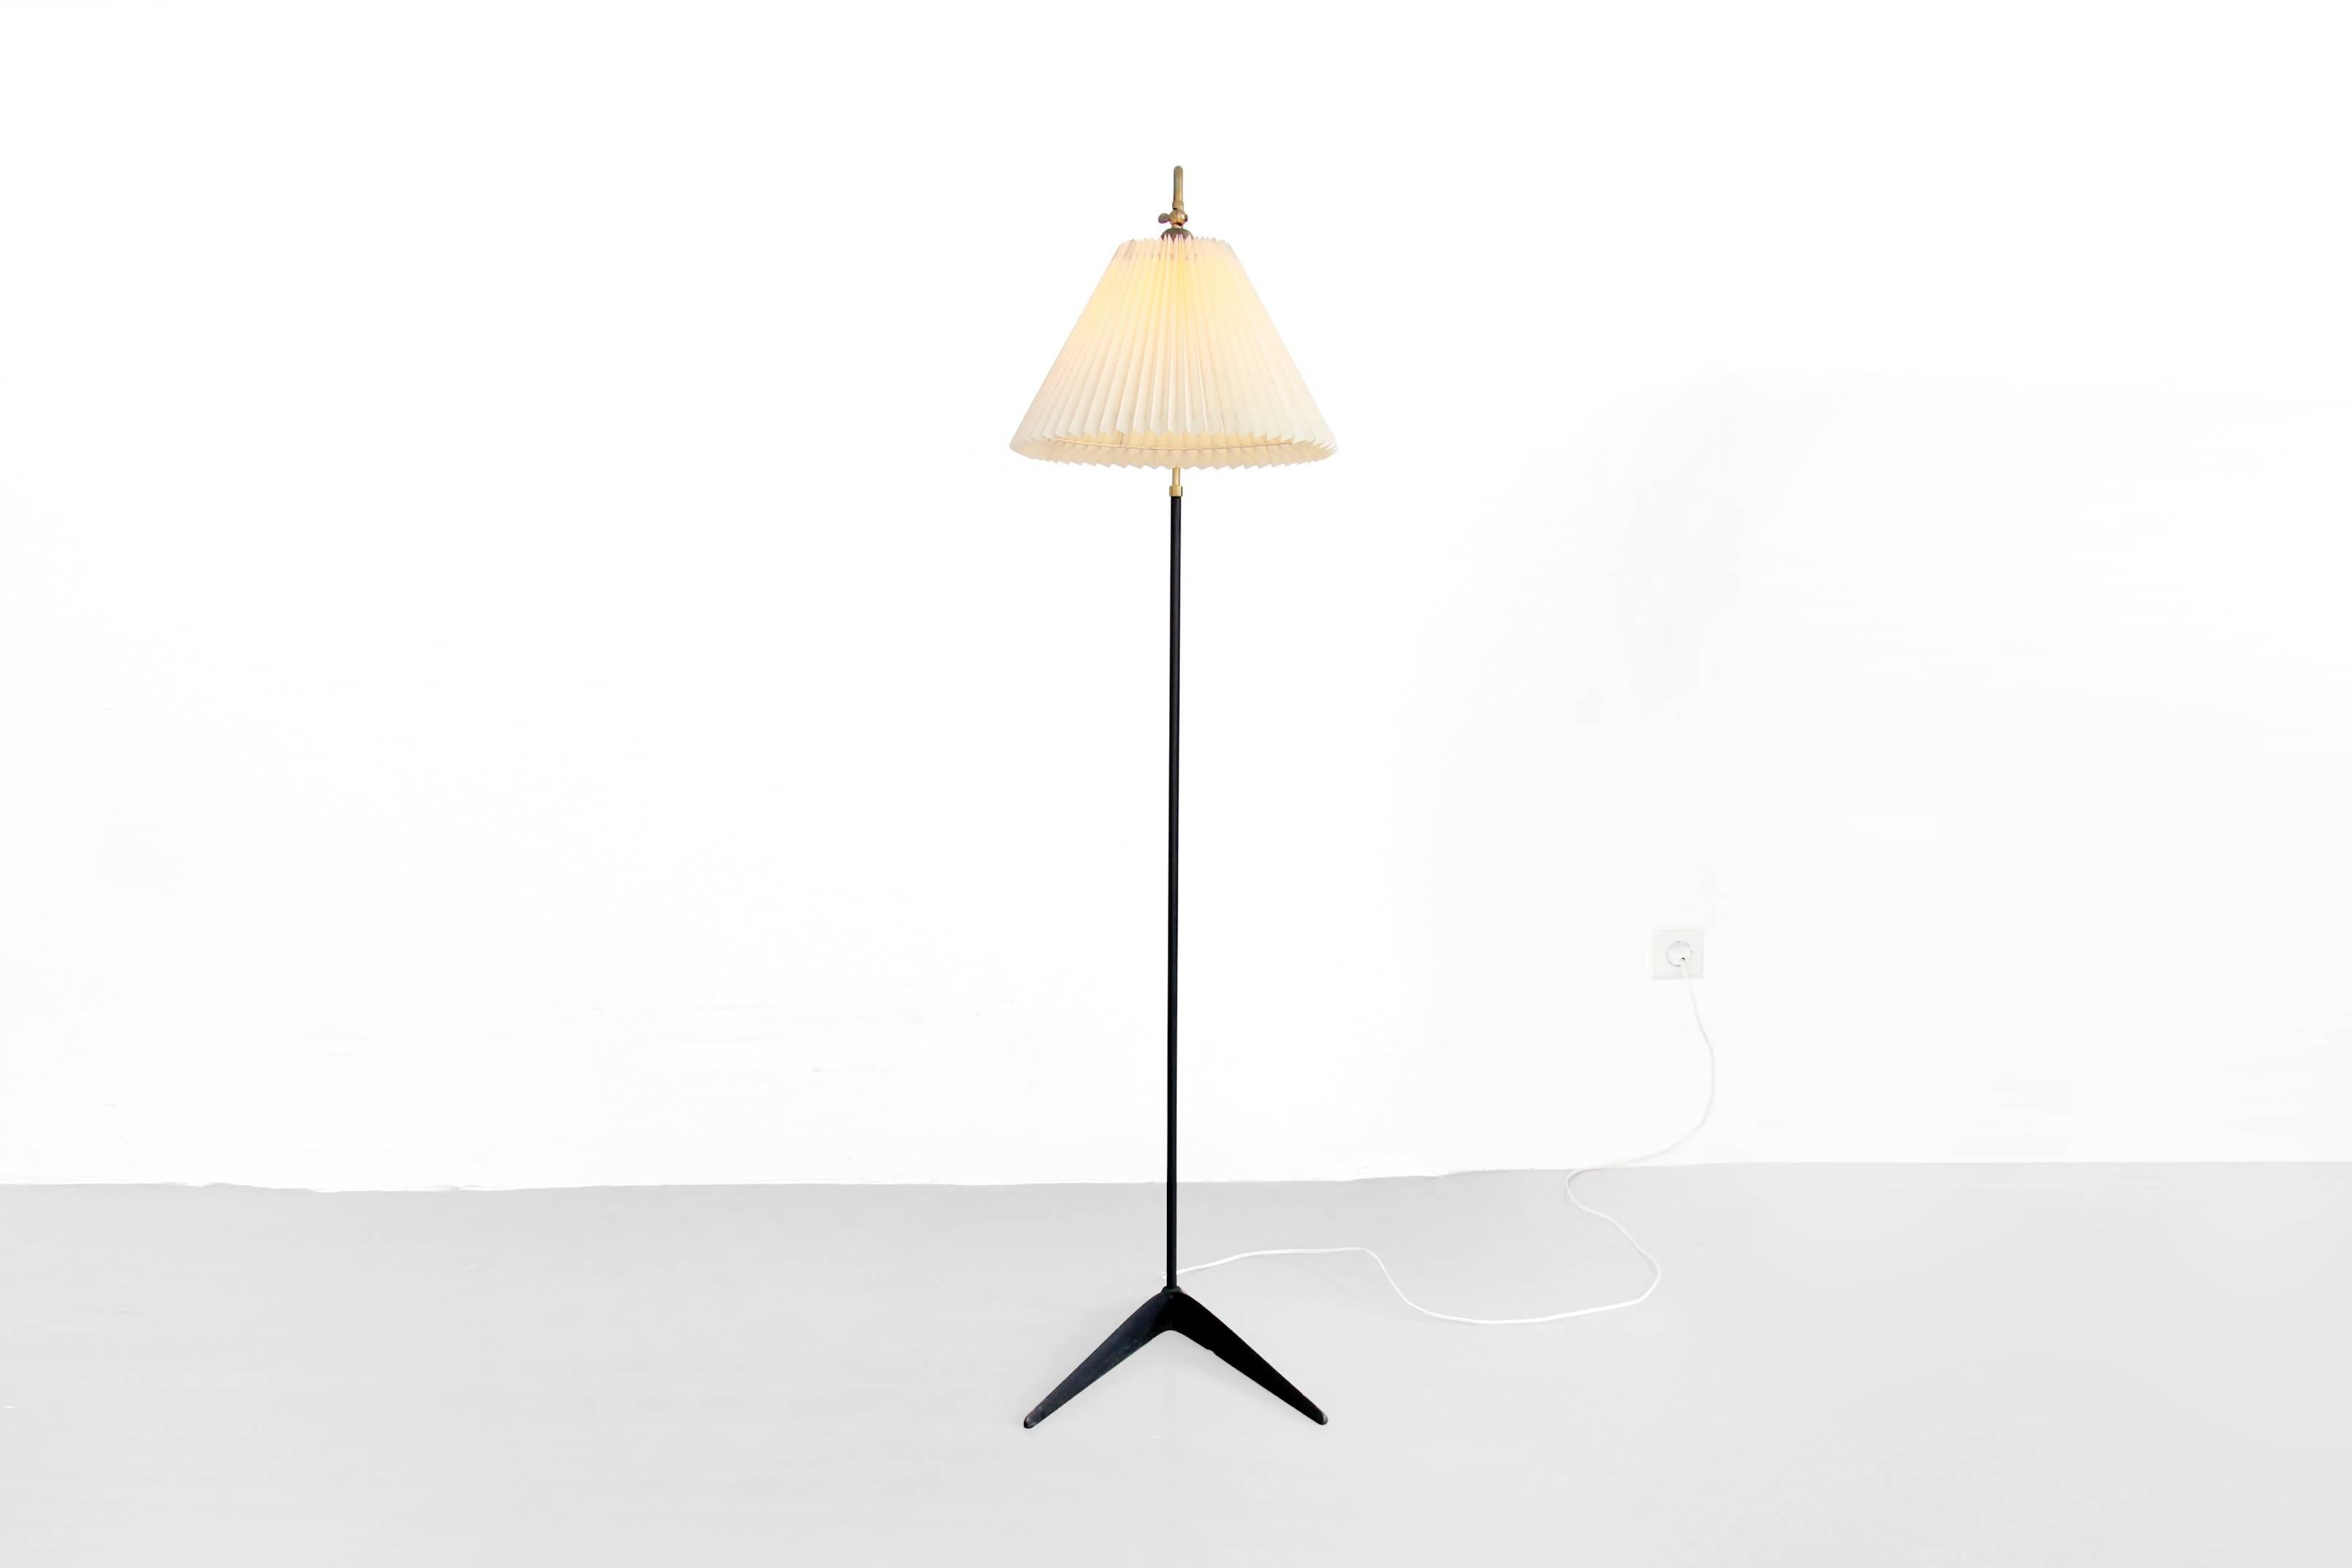 Very beautiful and rare floor lamp designed by Svend Aage Holm Sorensen for Holm Sørensen & Co, Denmark in 1950s. This lamp has a brass and black lacquered stem that rests on a beautifully crafted cast iron base. The lamp shade is also very